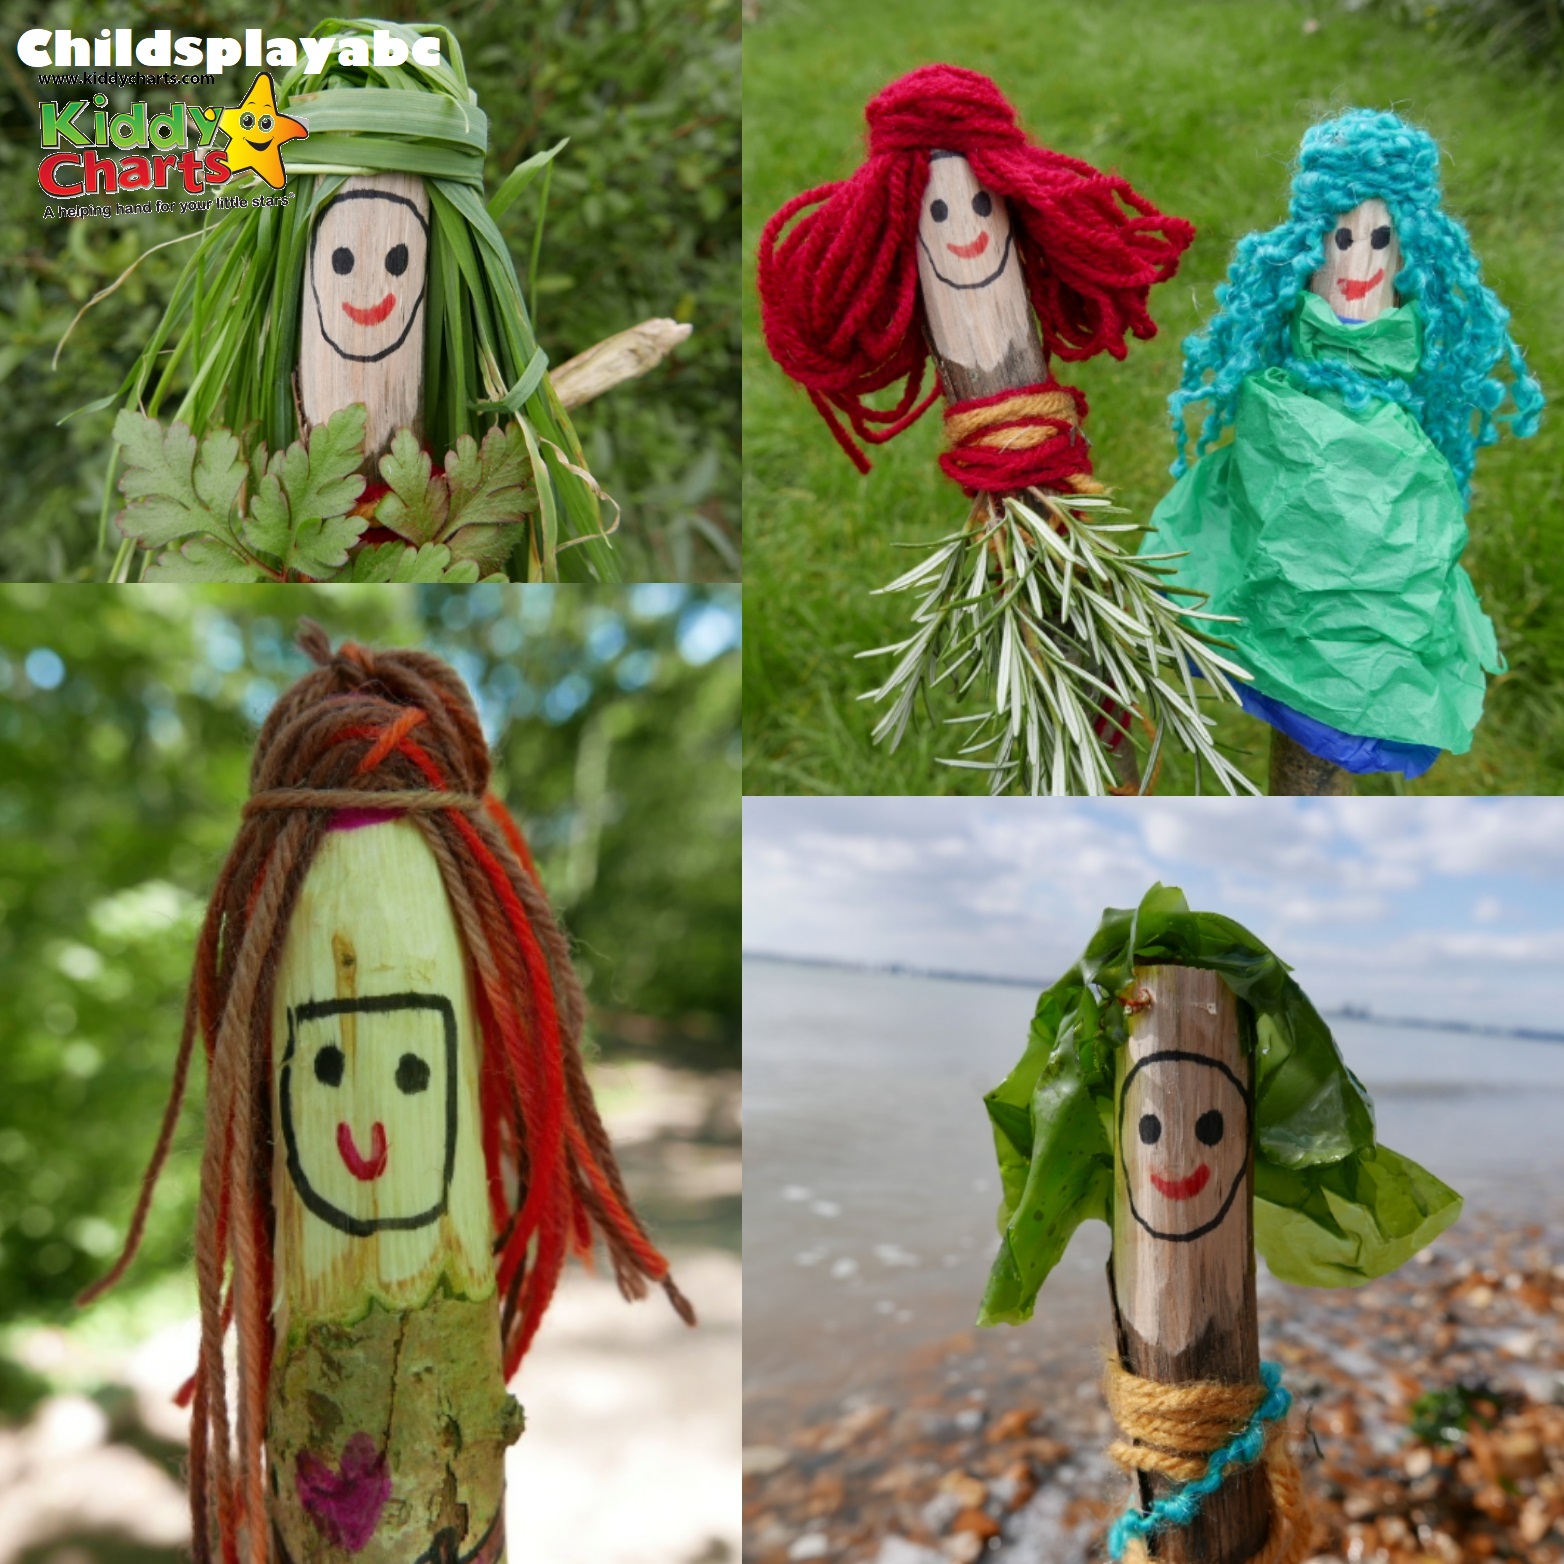 Arts and crafts activity ideas – Childsplayabc ~ Nature is our